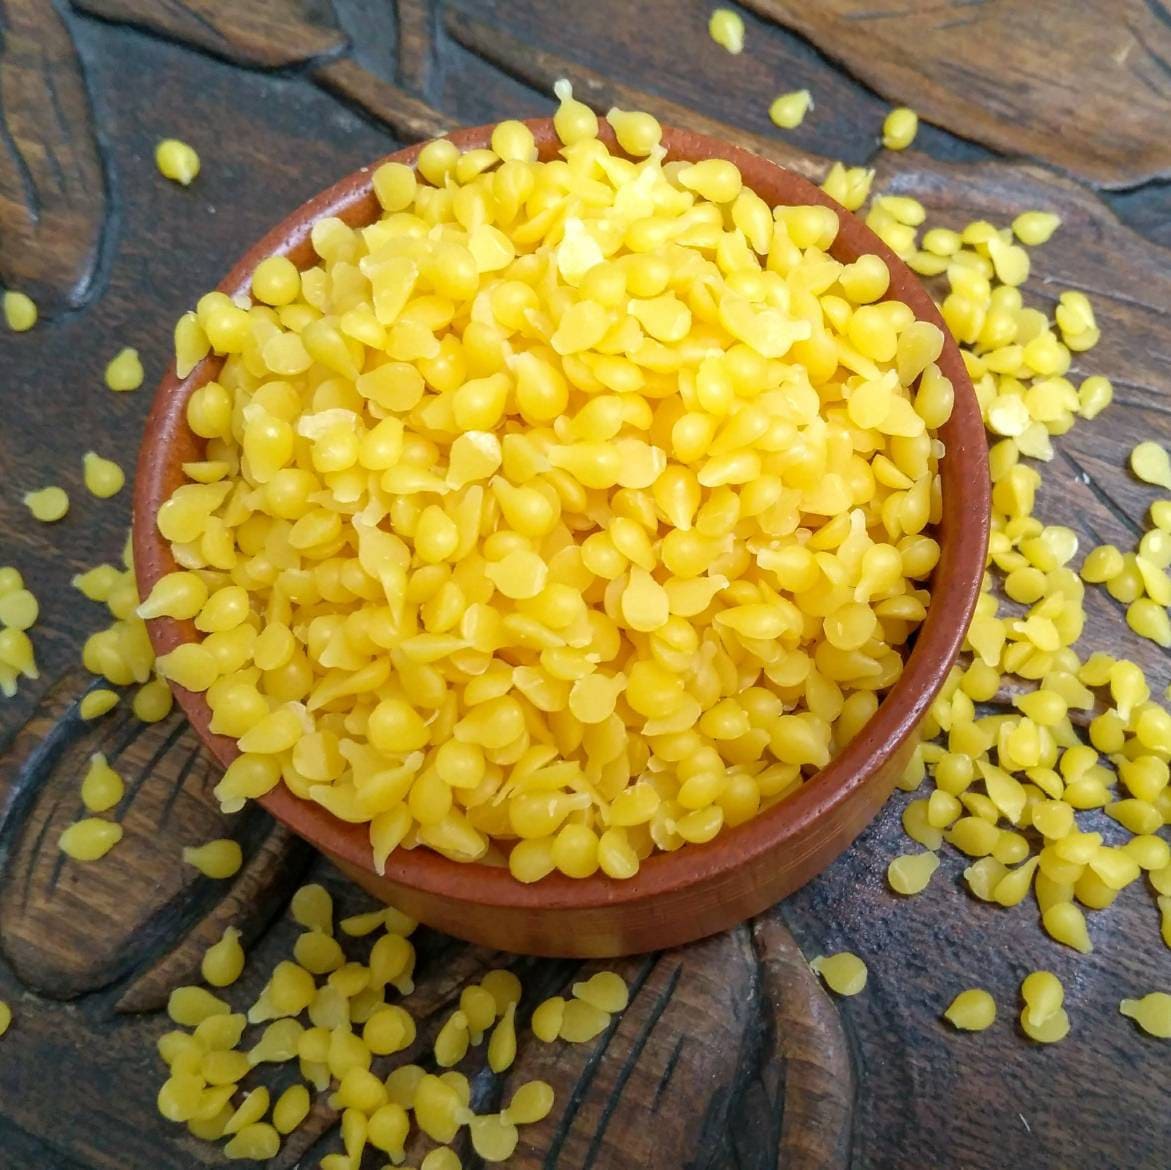 Organic Yellow Beeswax Pellets 1 lb, Pure, Natural, Cosmetic Grade Bees  Wax, Triple Filtered, Great for Diy Lip Balm, Food Wrap, Lotions